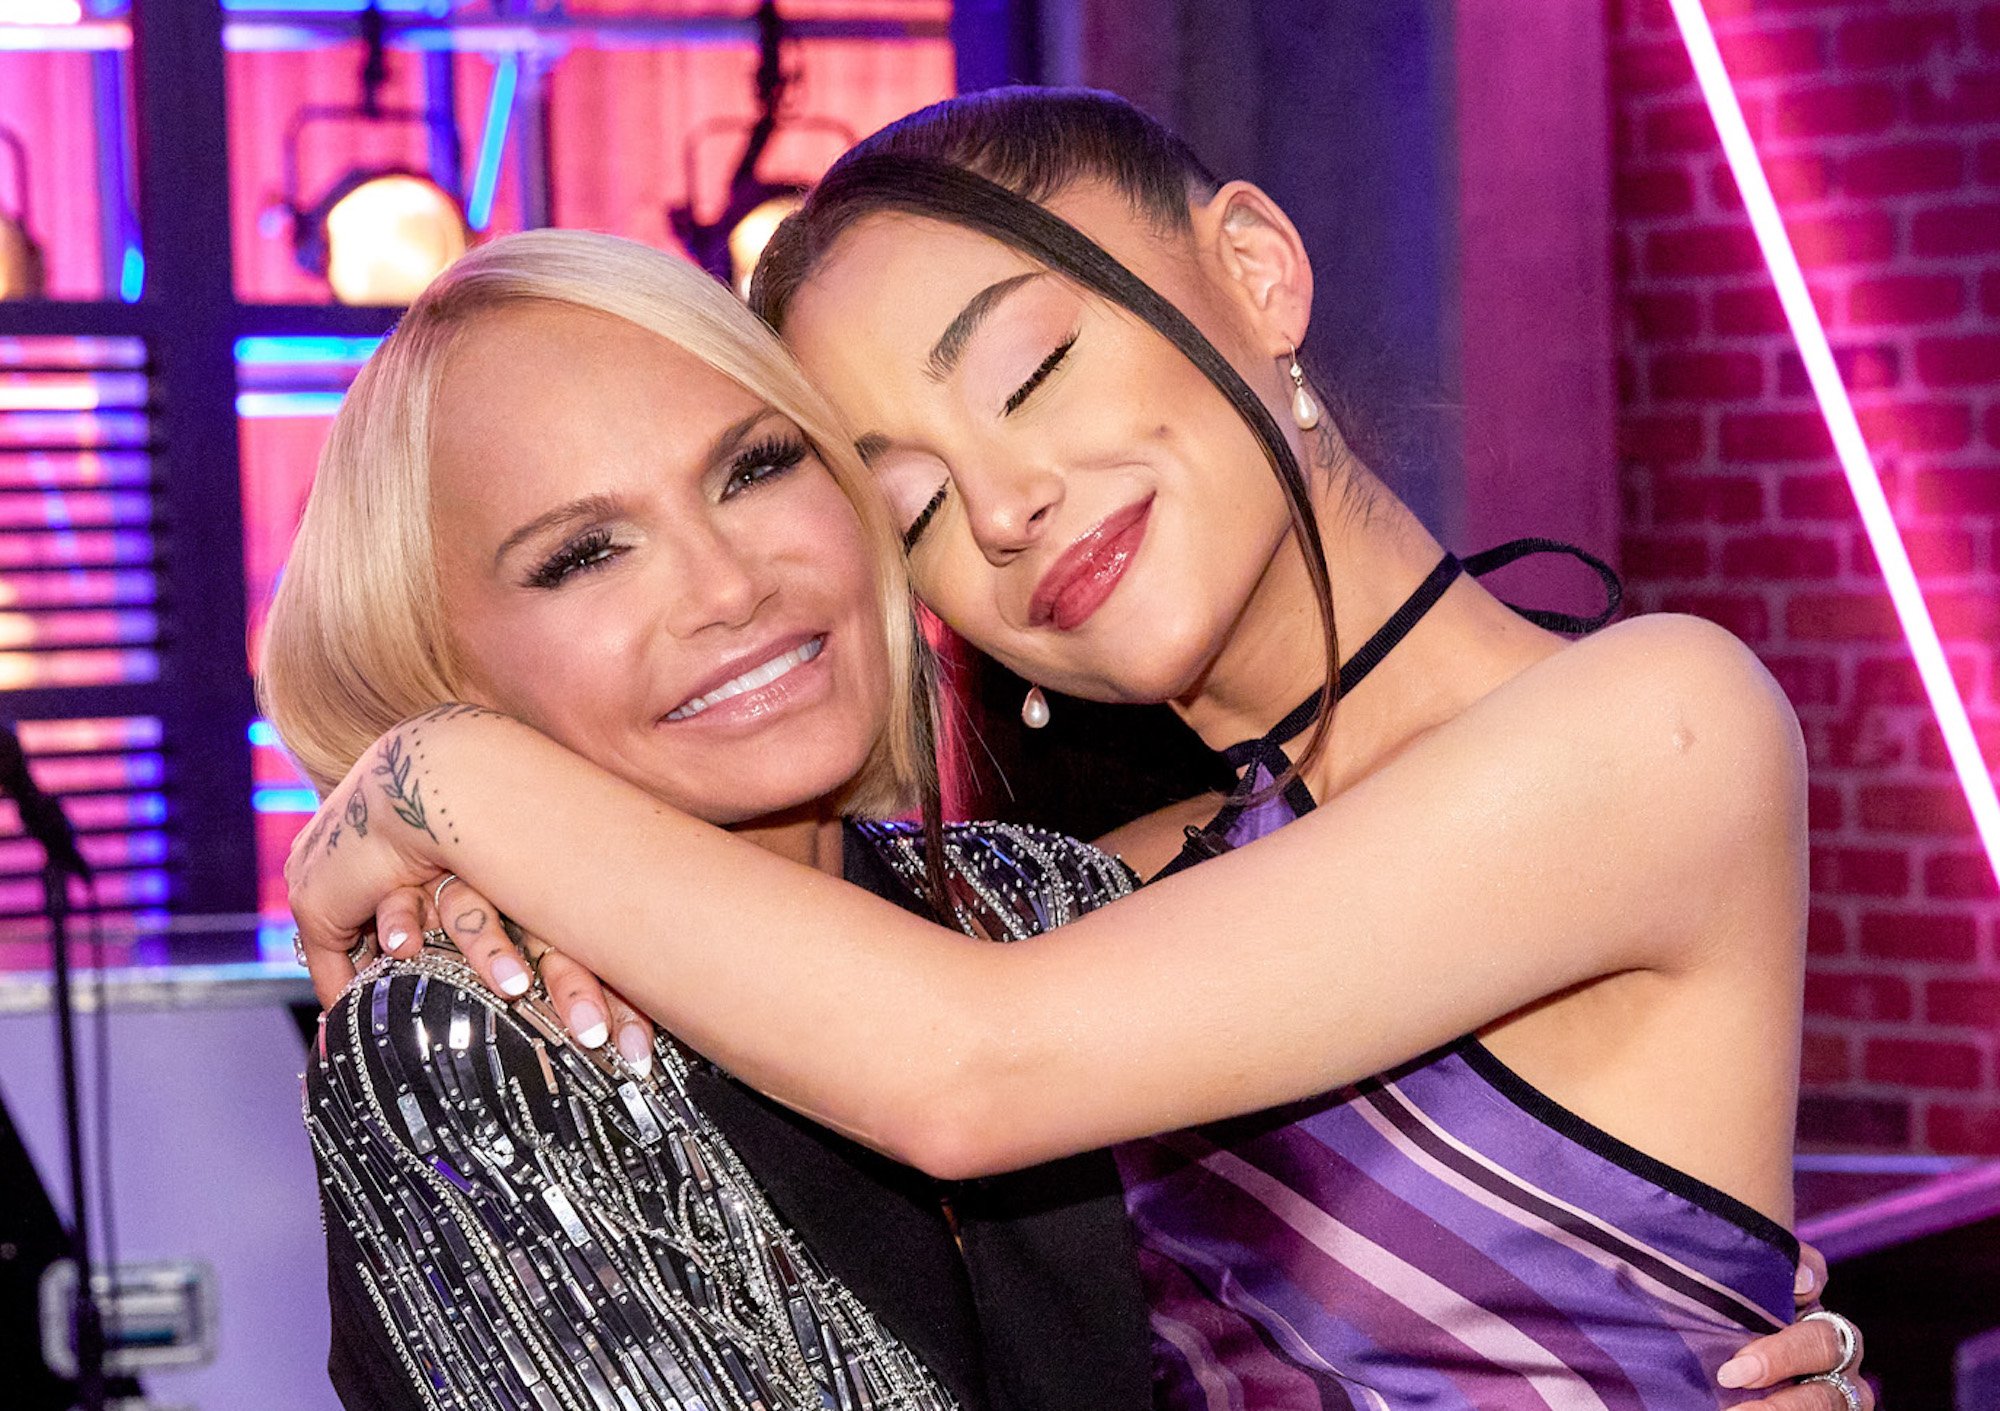 Kristin Chenoweth and Ariana Grande on set of 'The Voice.' The women hug and smile for the camera on set of the singing competition.